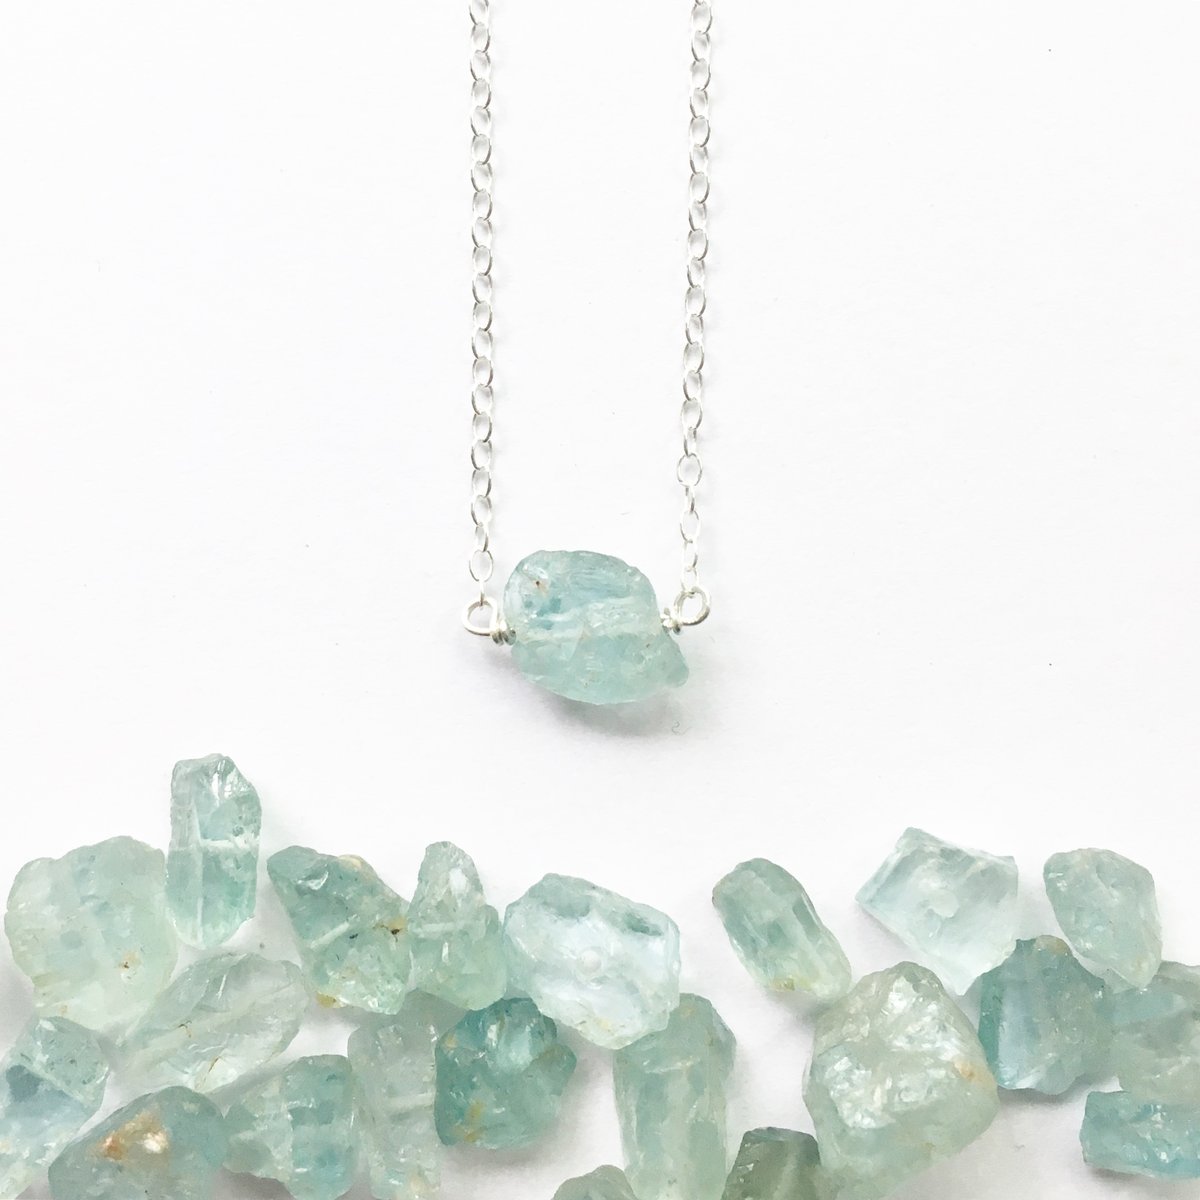 Aquamarine Nugget Necklace - on Sterling Silver | The Midnight Deer